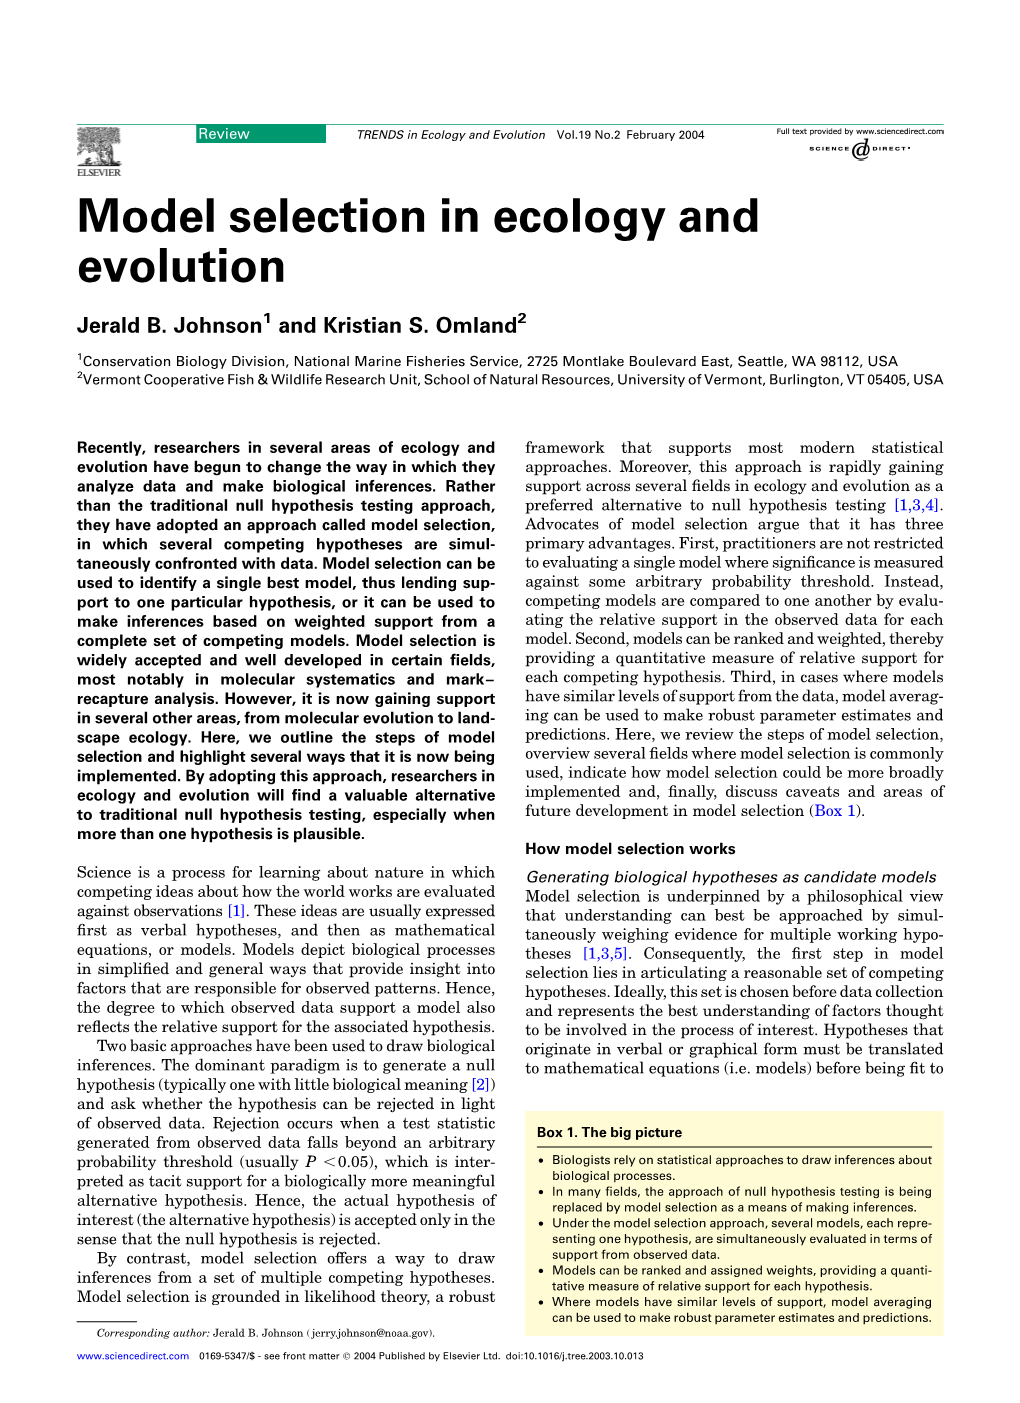 Model Selection in Ecology and Evolution